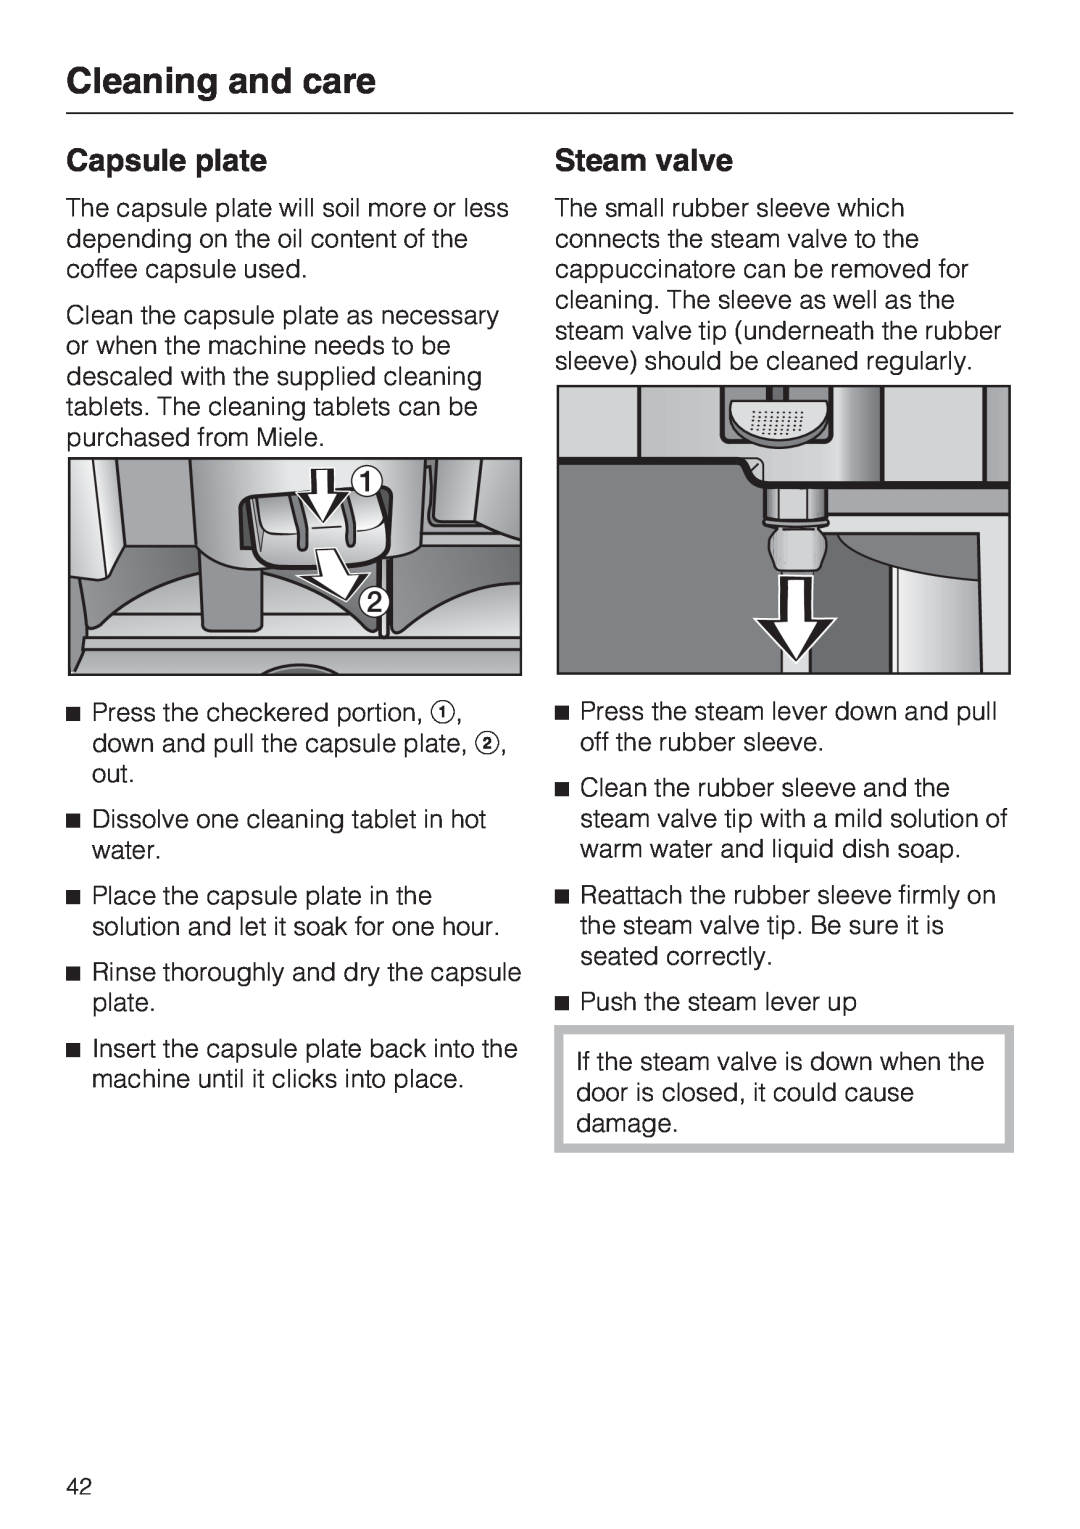 Miele CVA 2652 installation instructions Capsule plate, Steam valve, Cleaning and care 